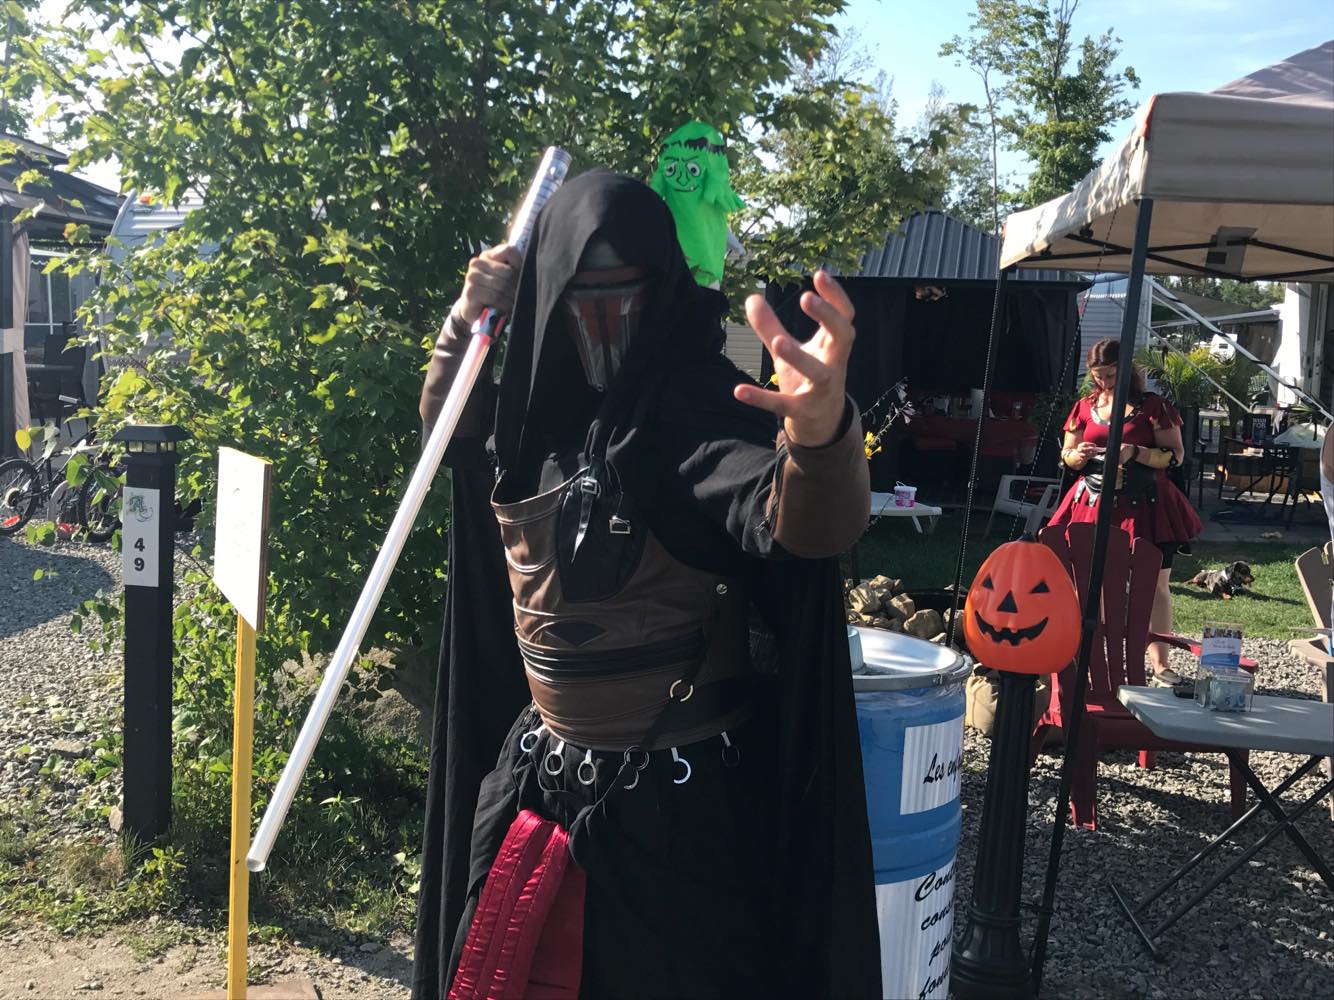 http://www.familycampgrounds.ca/wp-content/uploads/2018/08/halloween-complexe-atlantide-2018-17.jpg